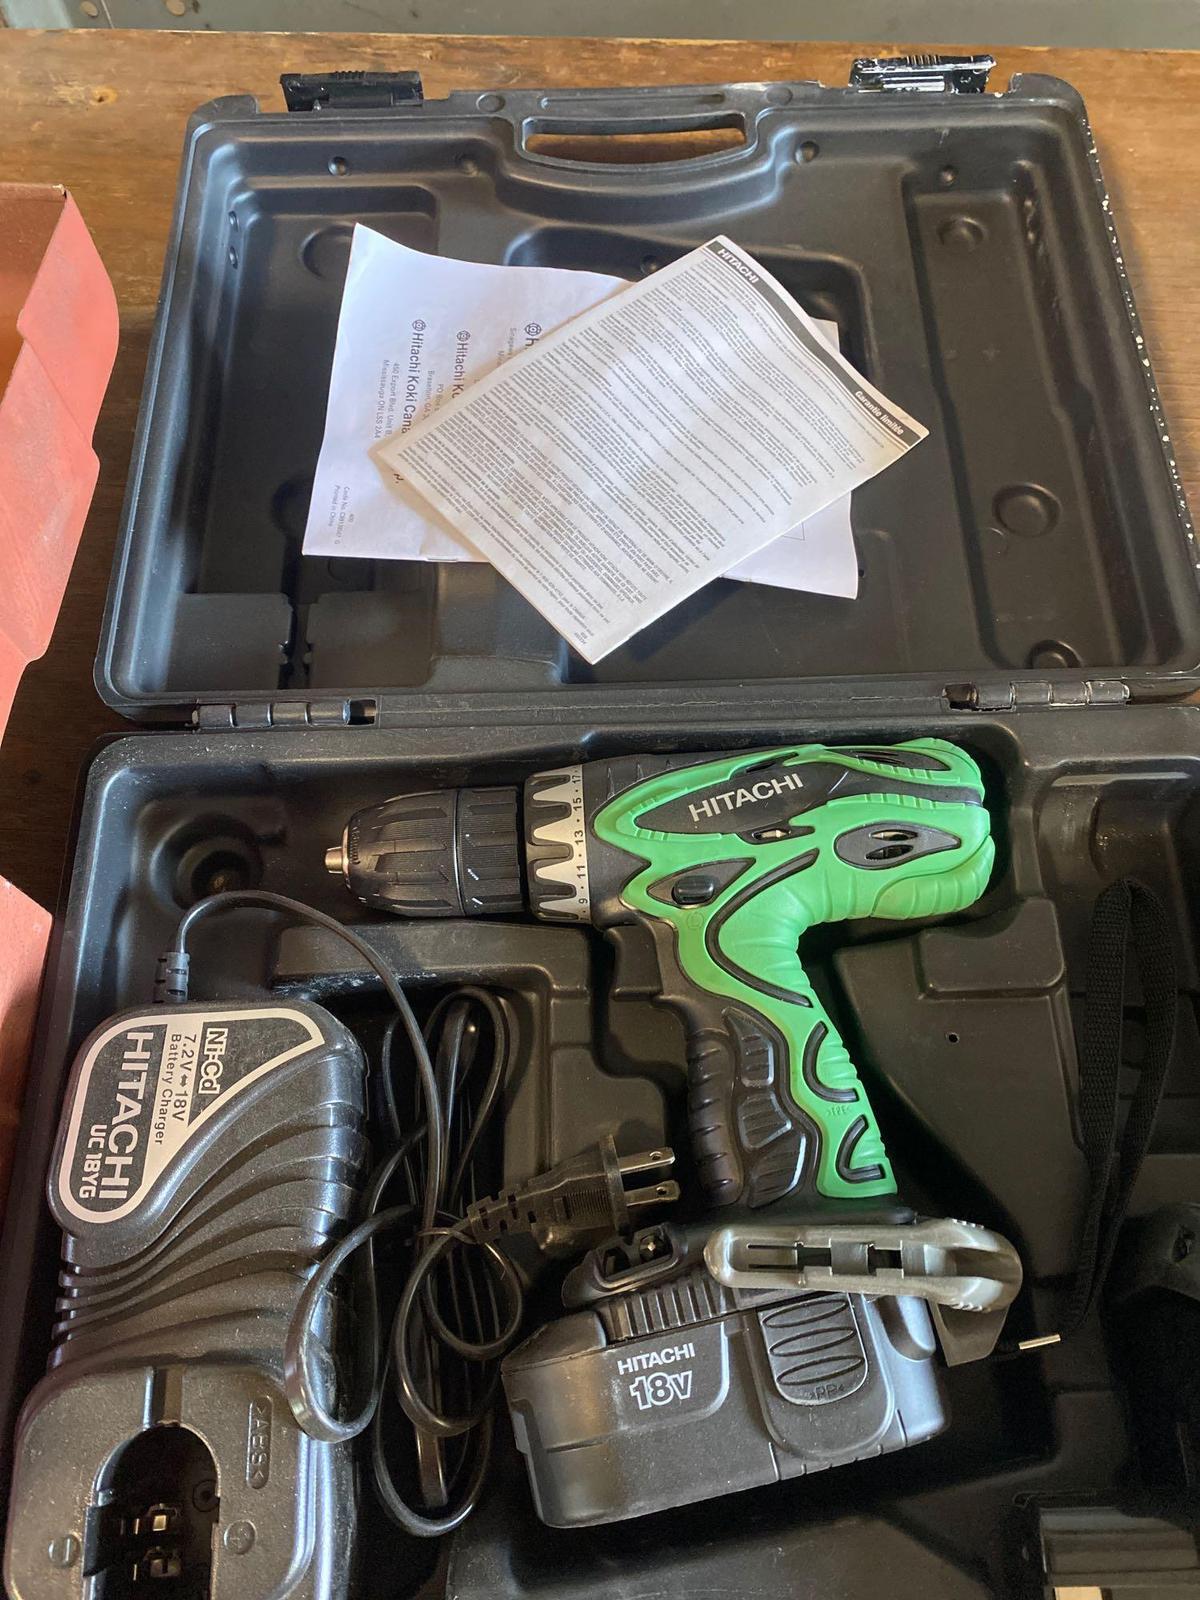 Hitachi 18v Cordless Drill w/ 2 batteries and charger